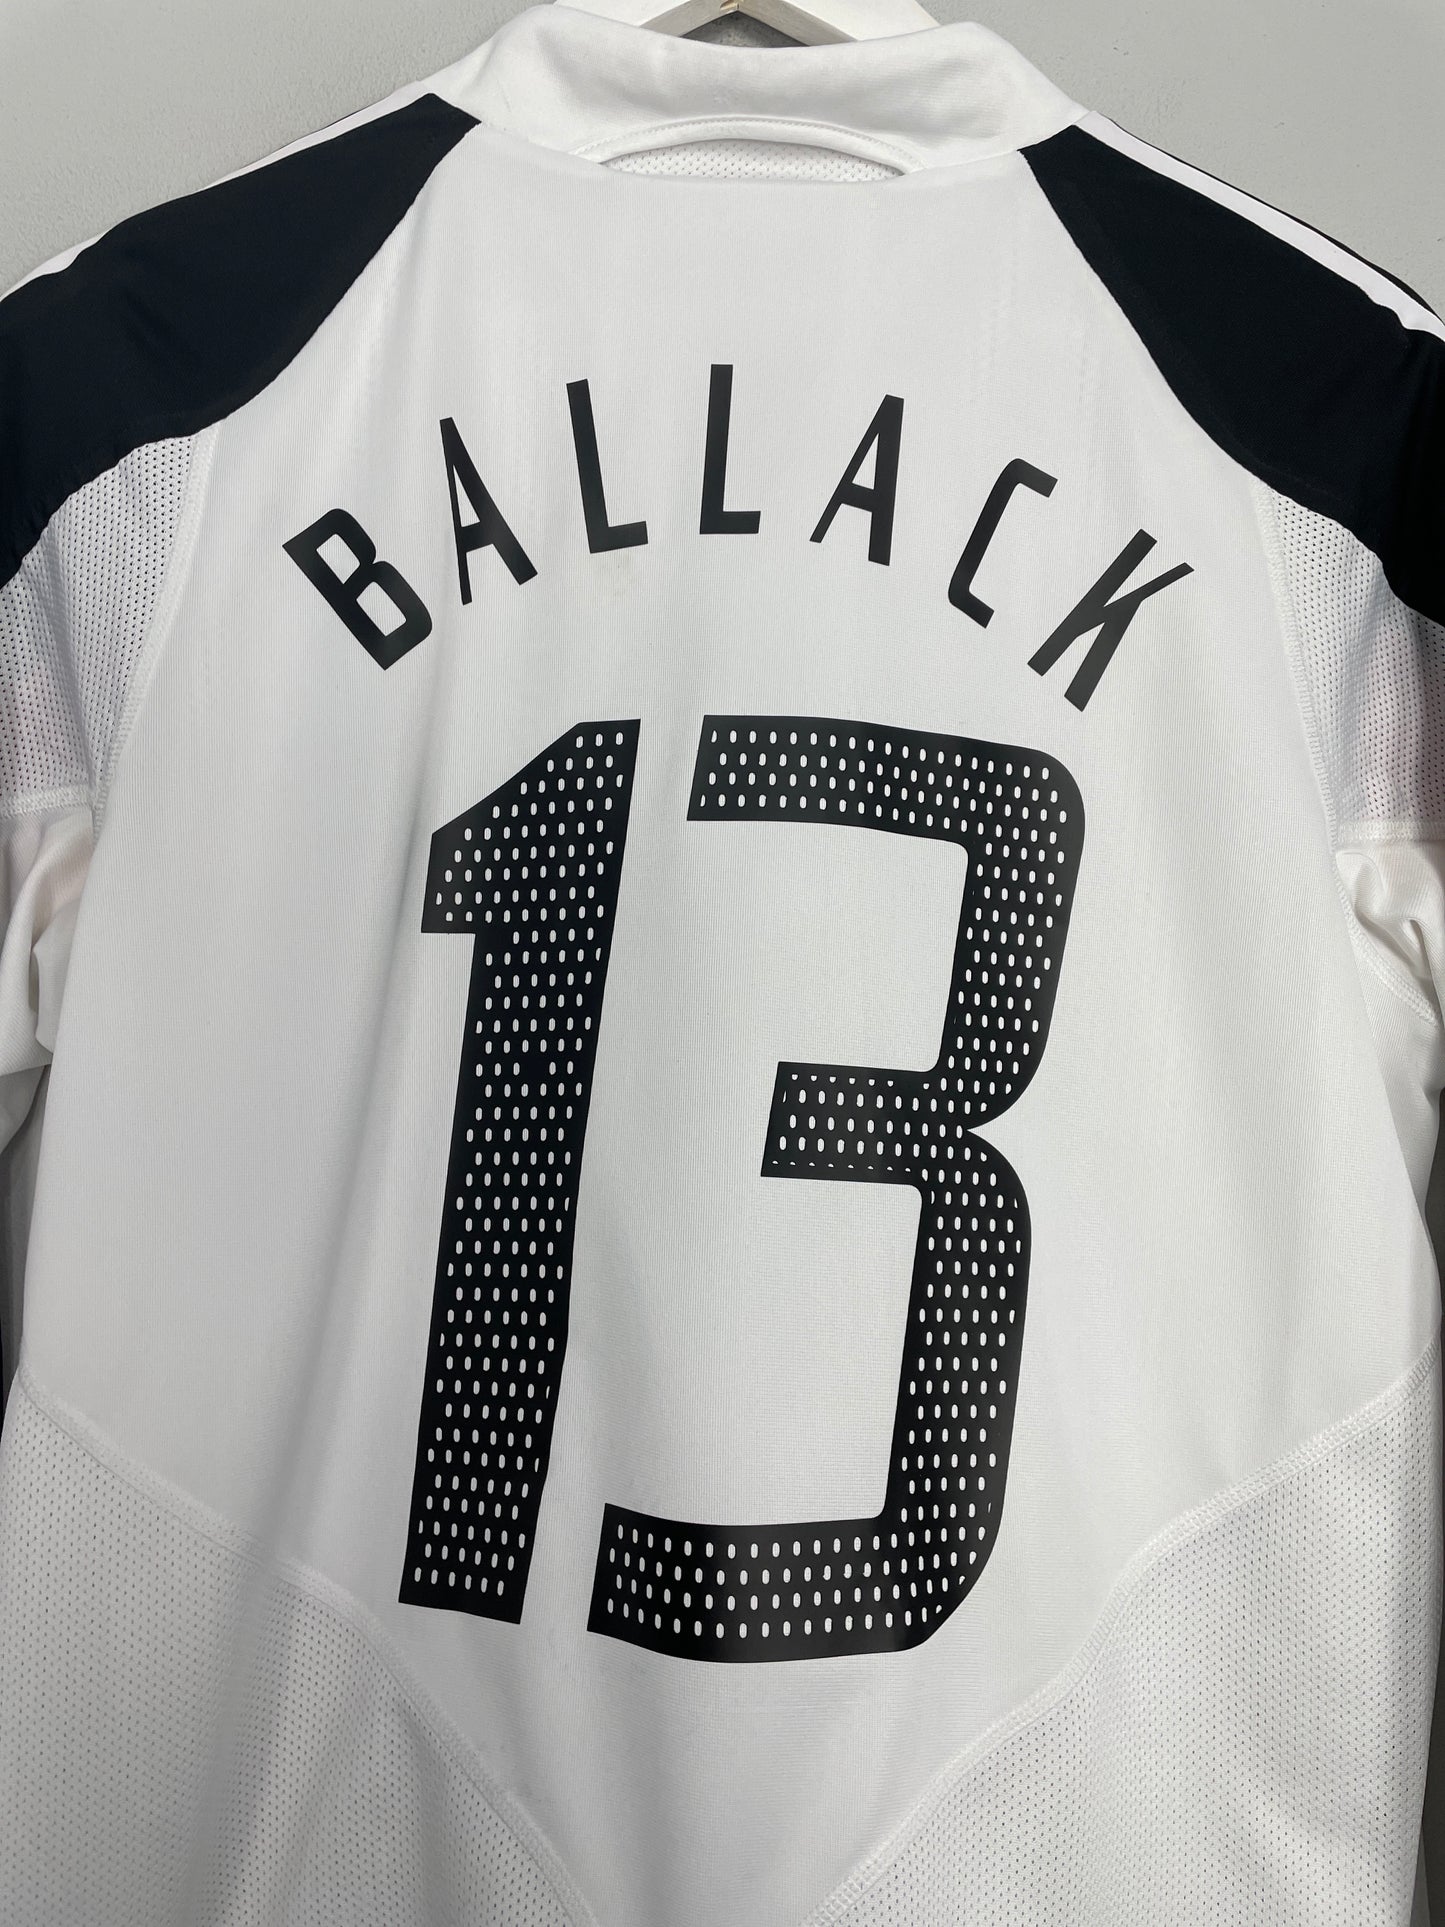 2004/05 GERMANY BALLACK #13 *PLAYER ISSUE* L/S HOME SHIRT (M) ADIDAS